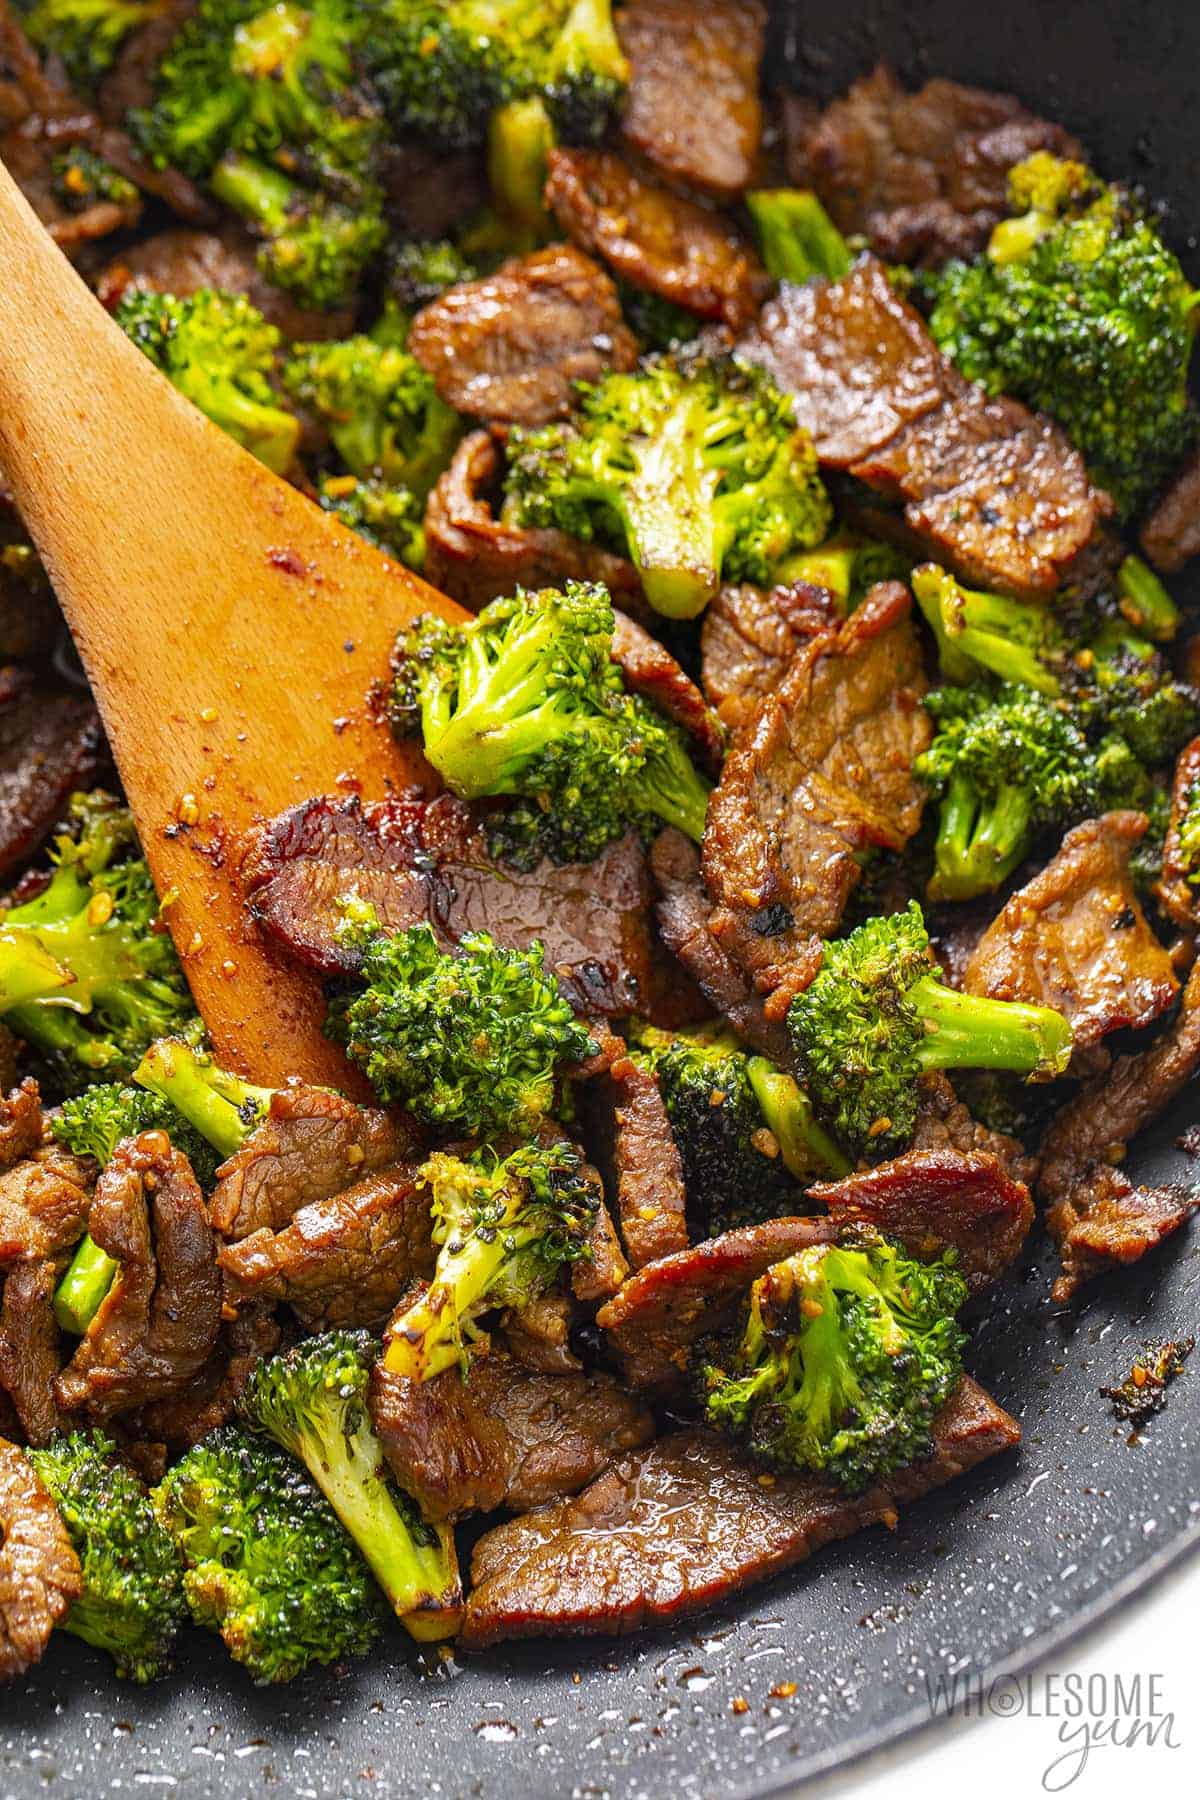 Skillet with beef and broccoli.